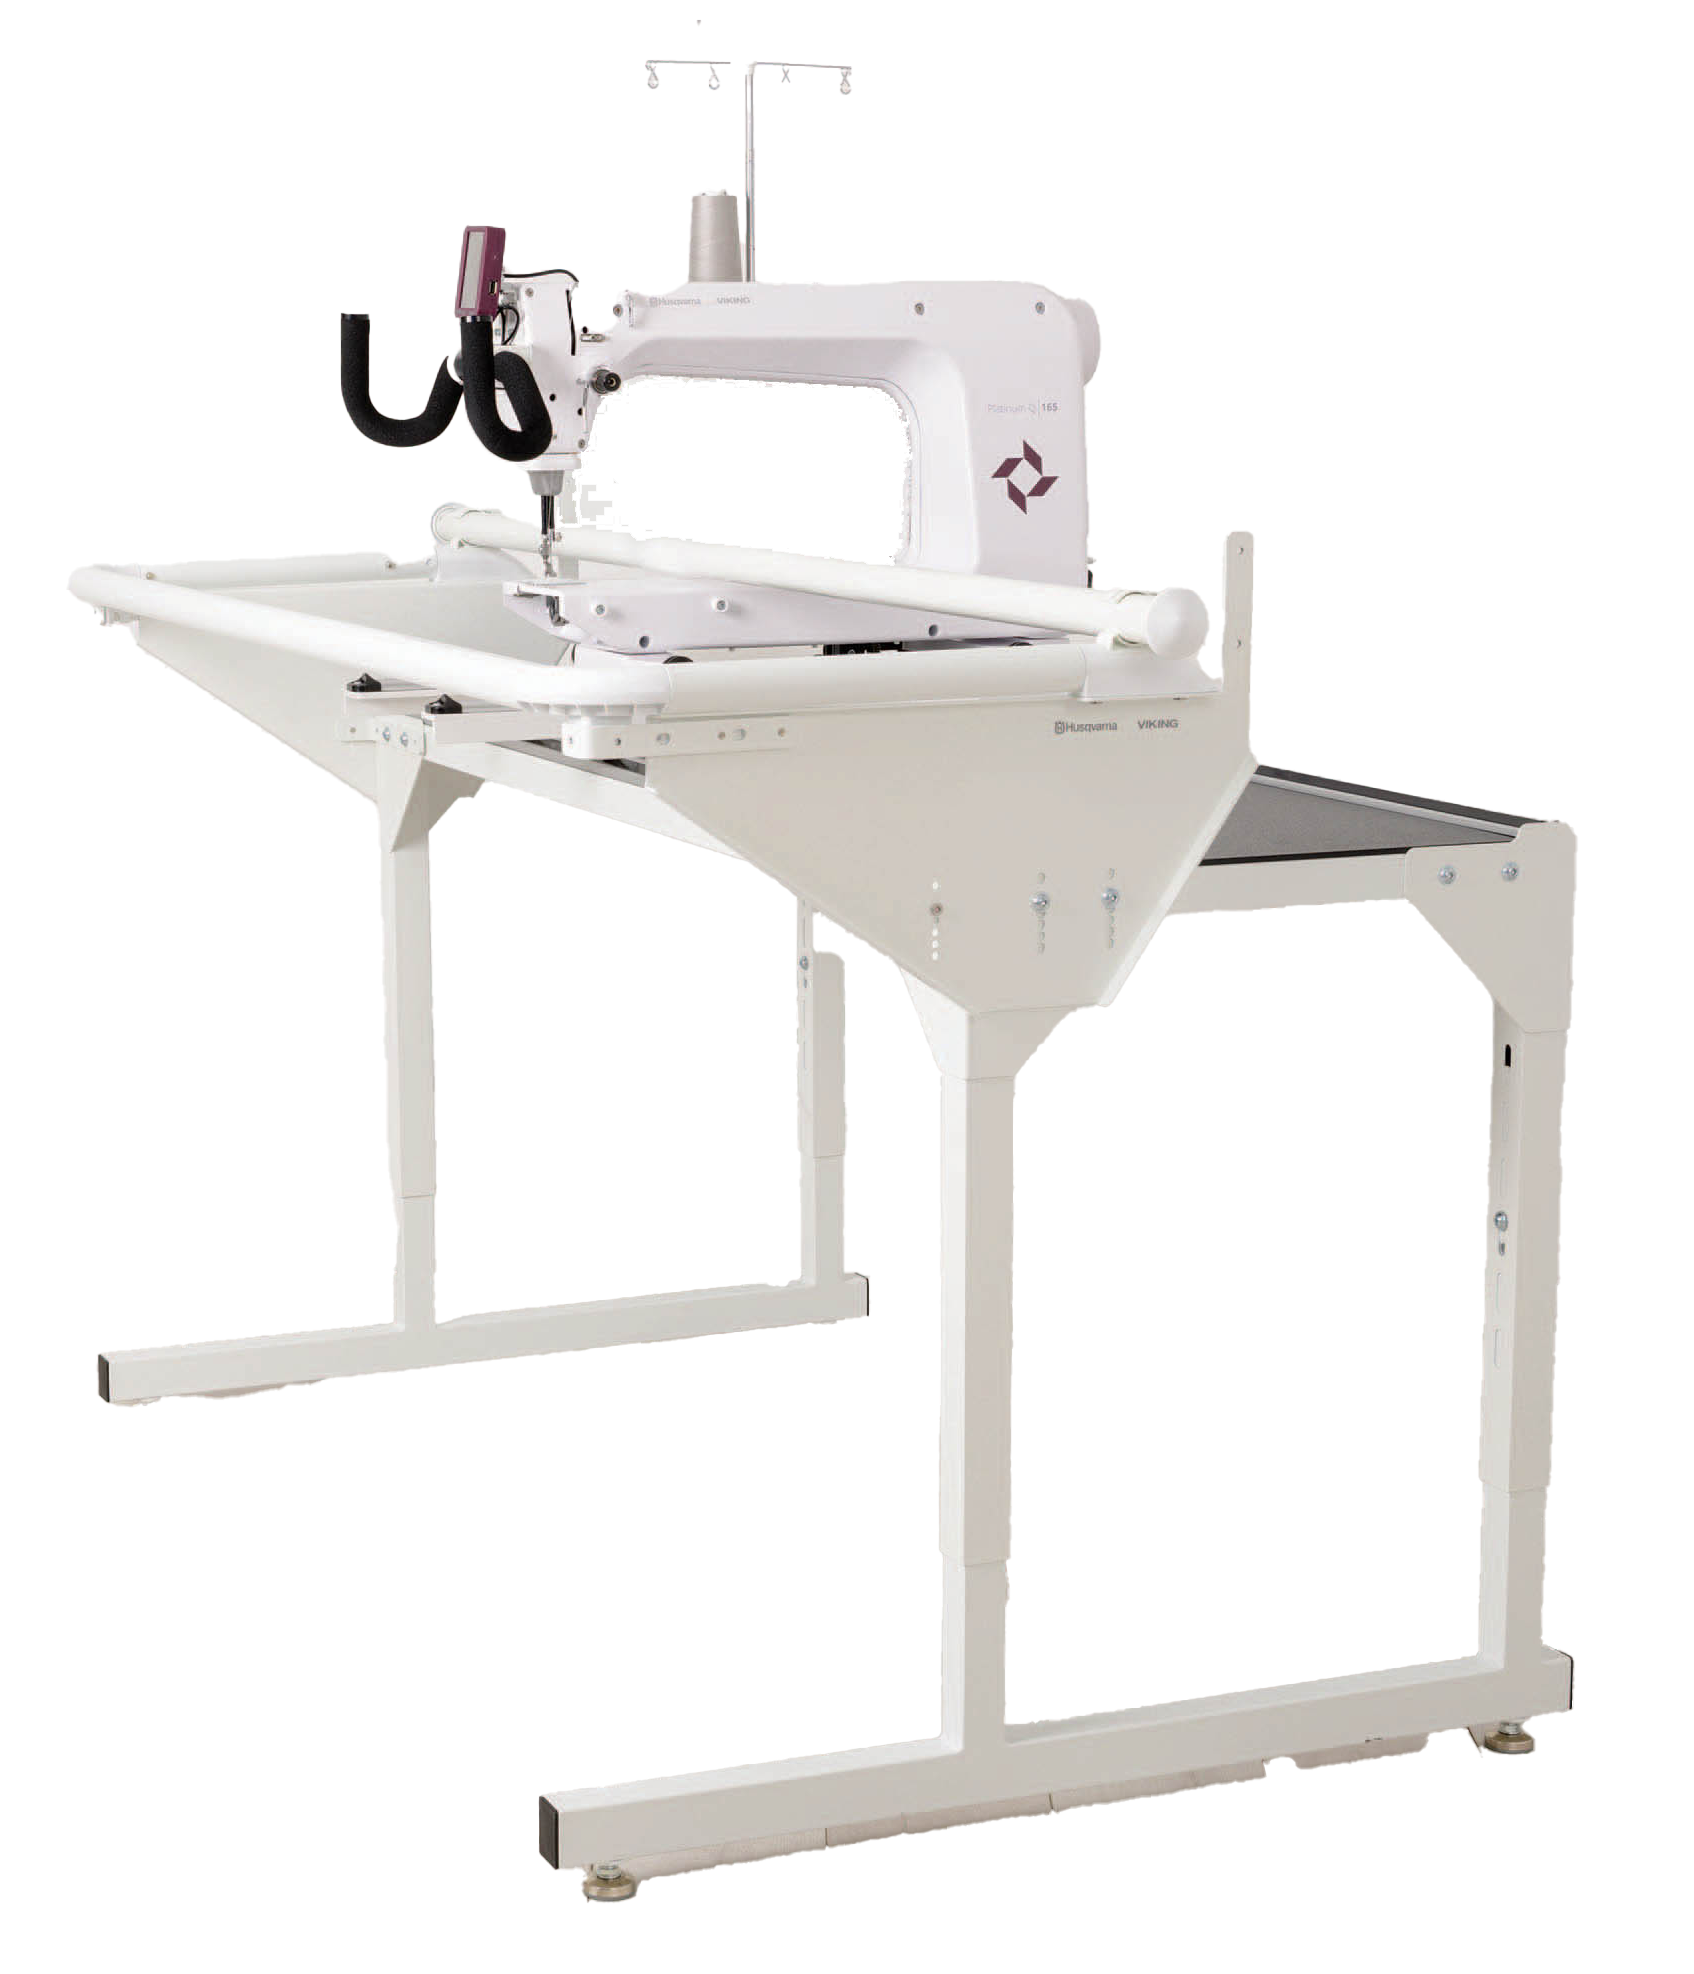 Shop the largest selection of genuine Husqvarna Viking Longarm Quilting Machines online at World Weidner